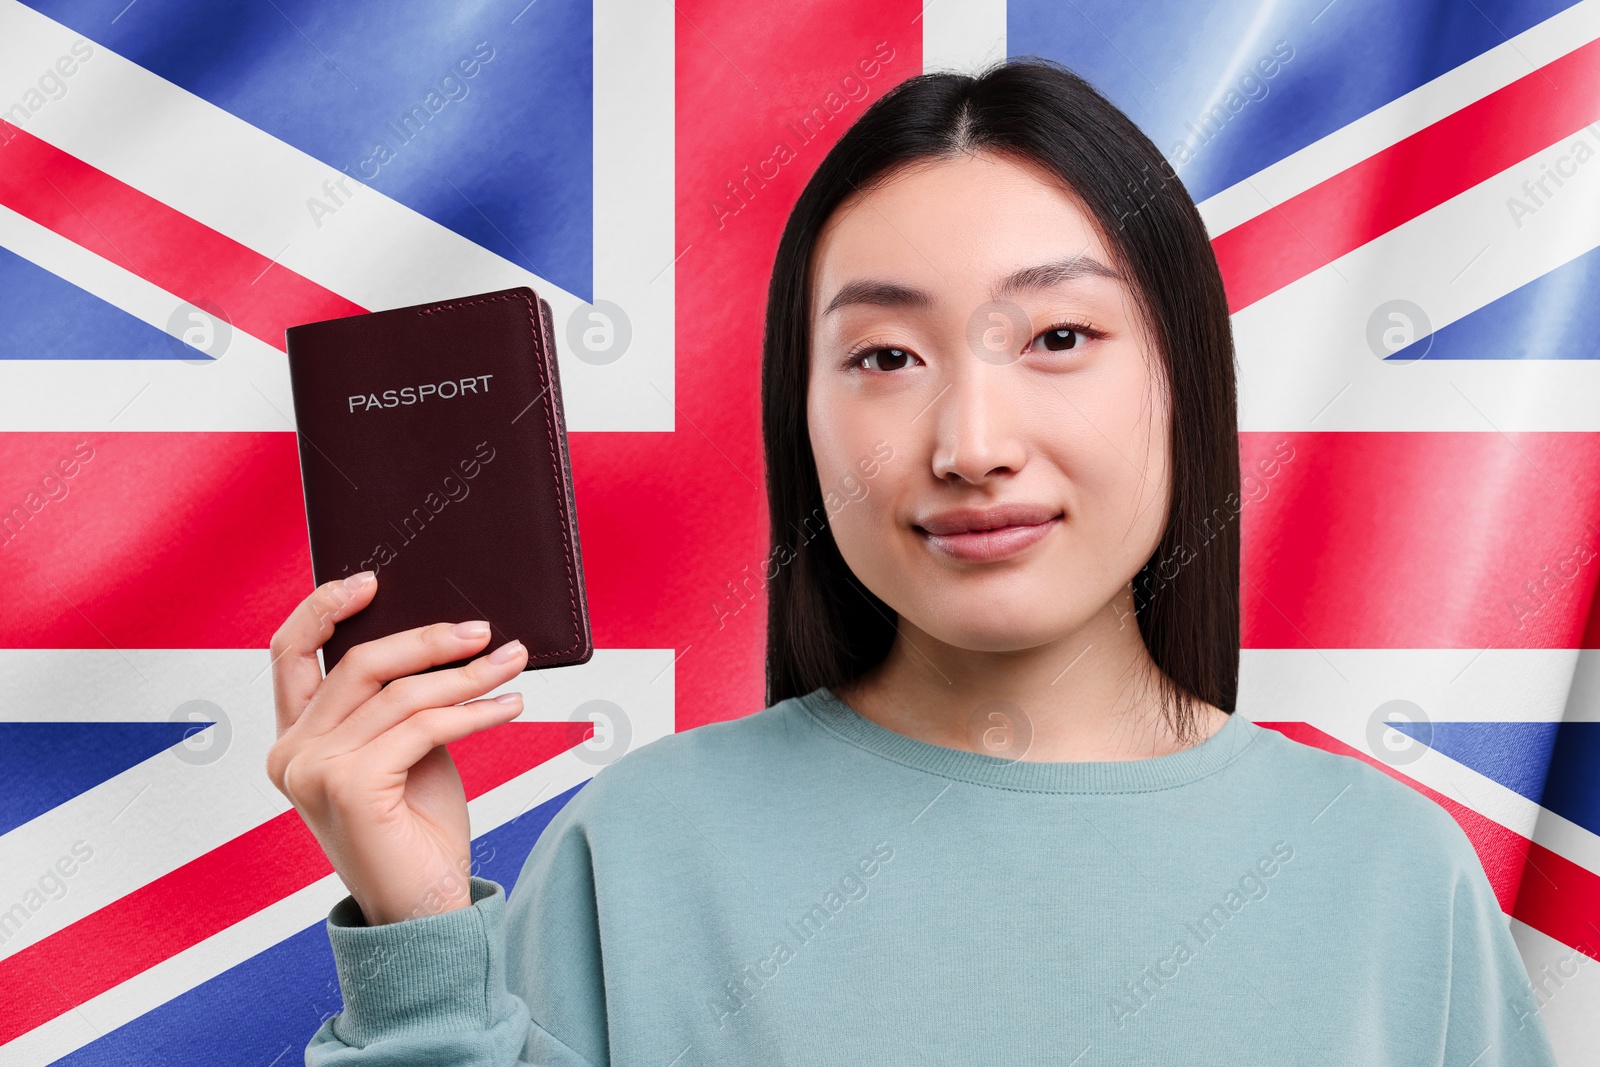 Image of Immigration. Woman with passport against national flag of United Kingdom